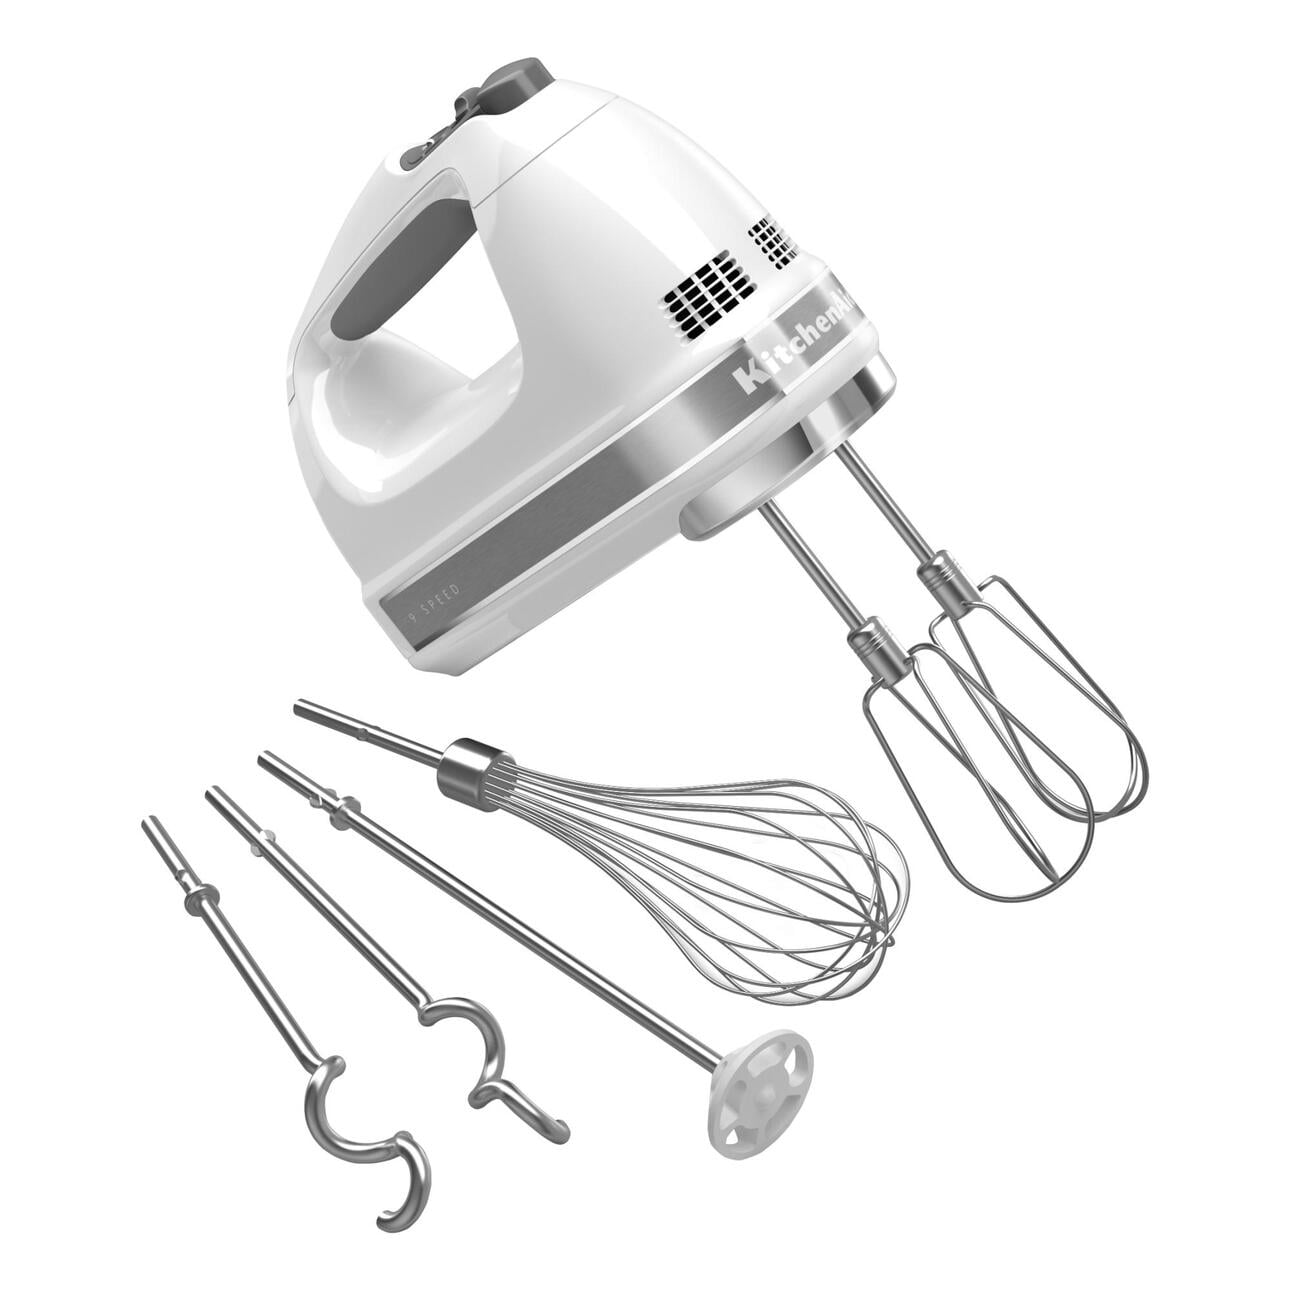 KitchenAid 9-Speed Digital Hand Mixer with Turbo Beater II Accessories and  Pro Whisk - Candy Apple Red